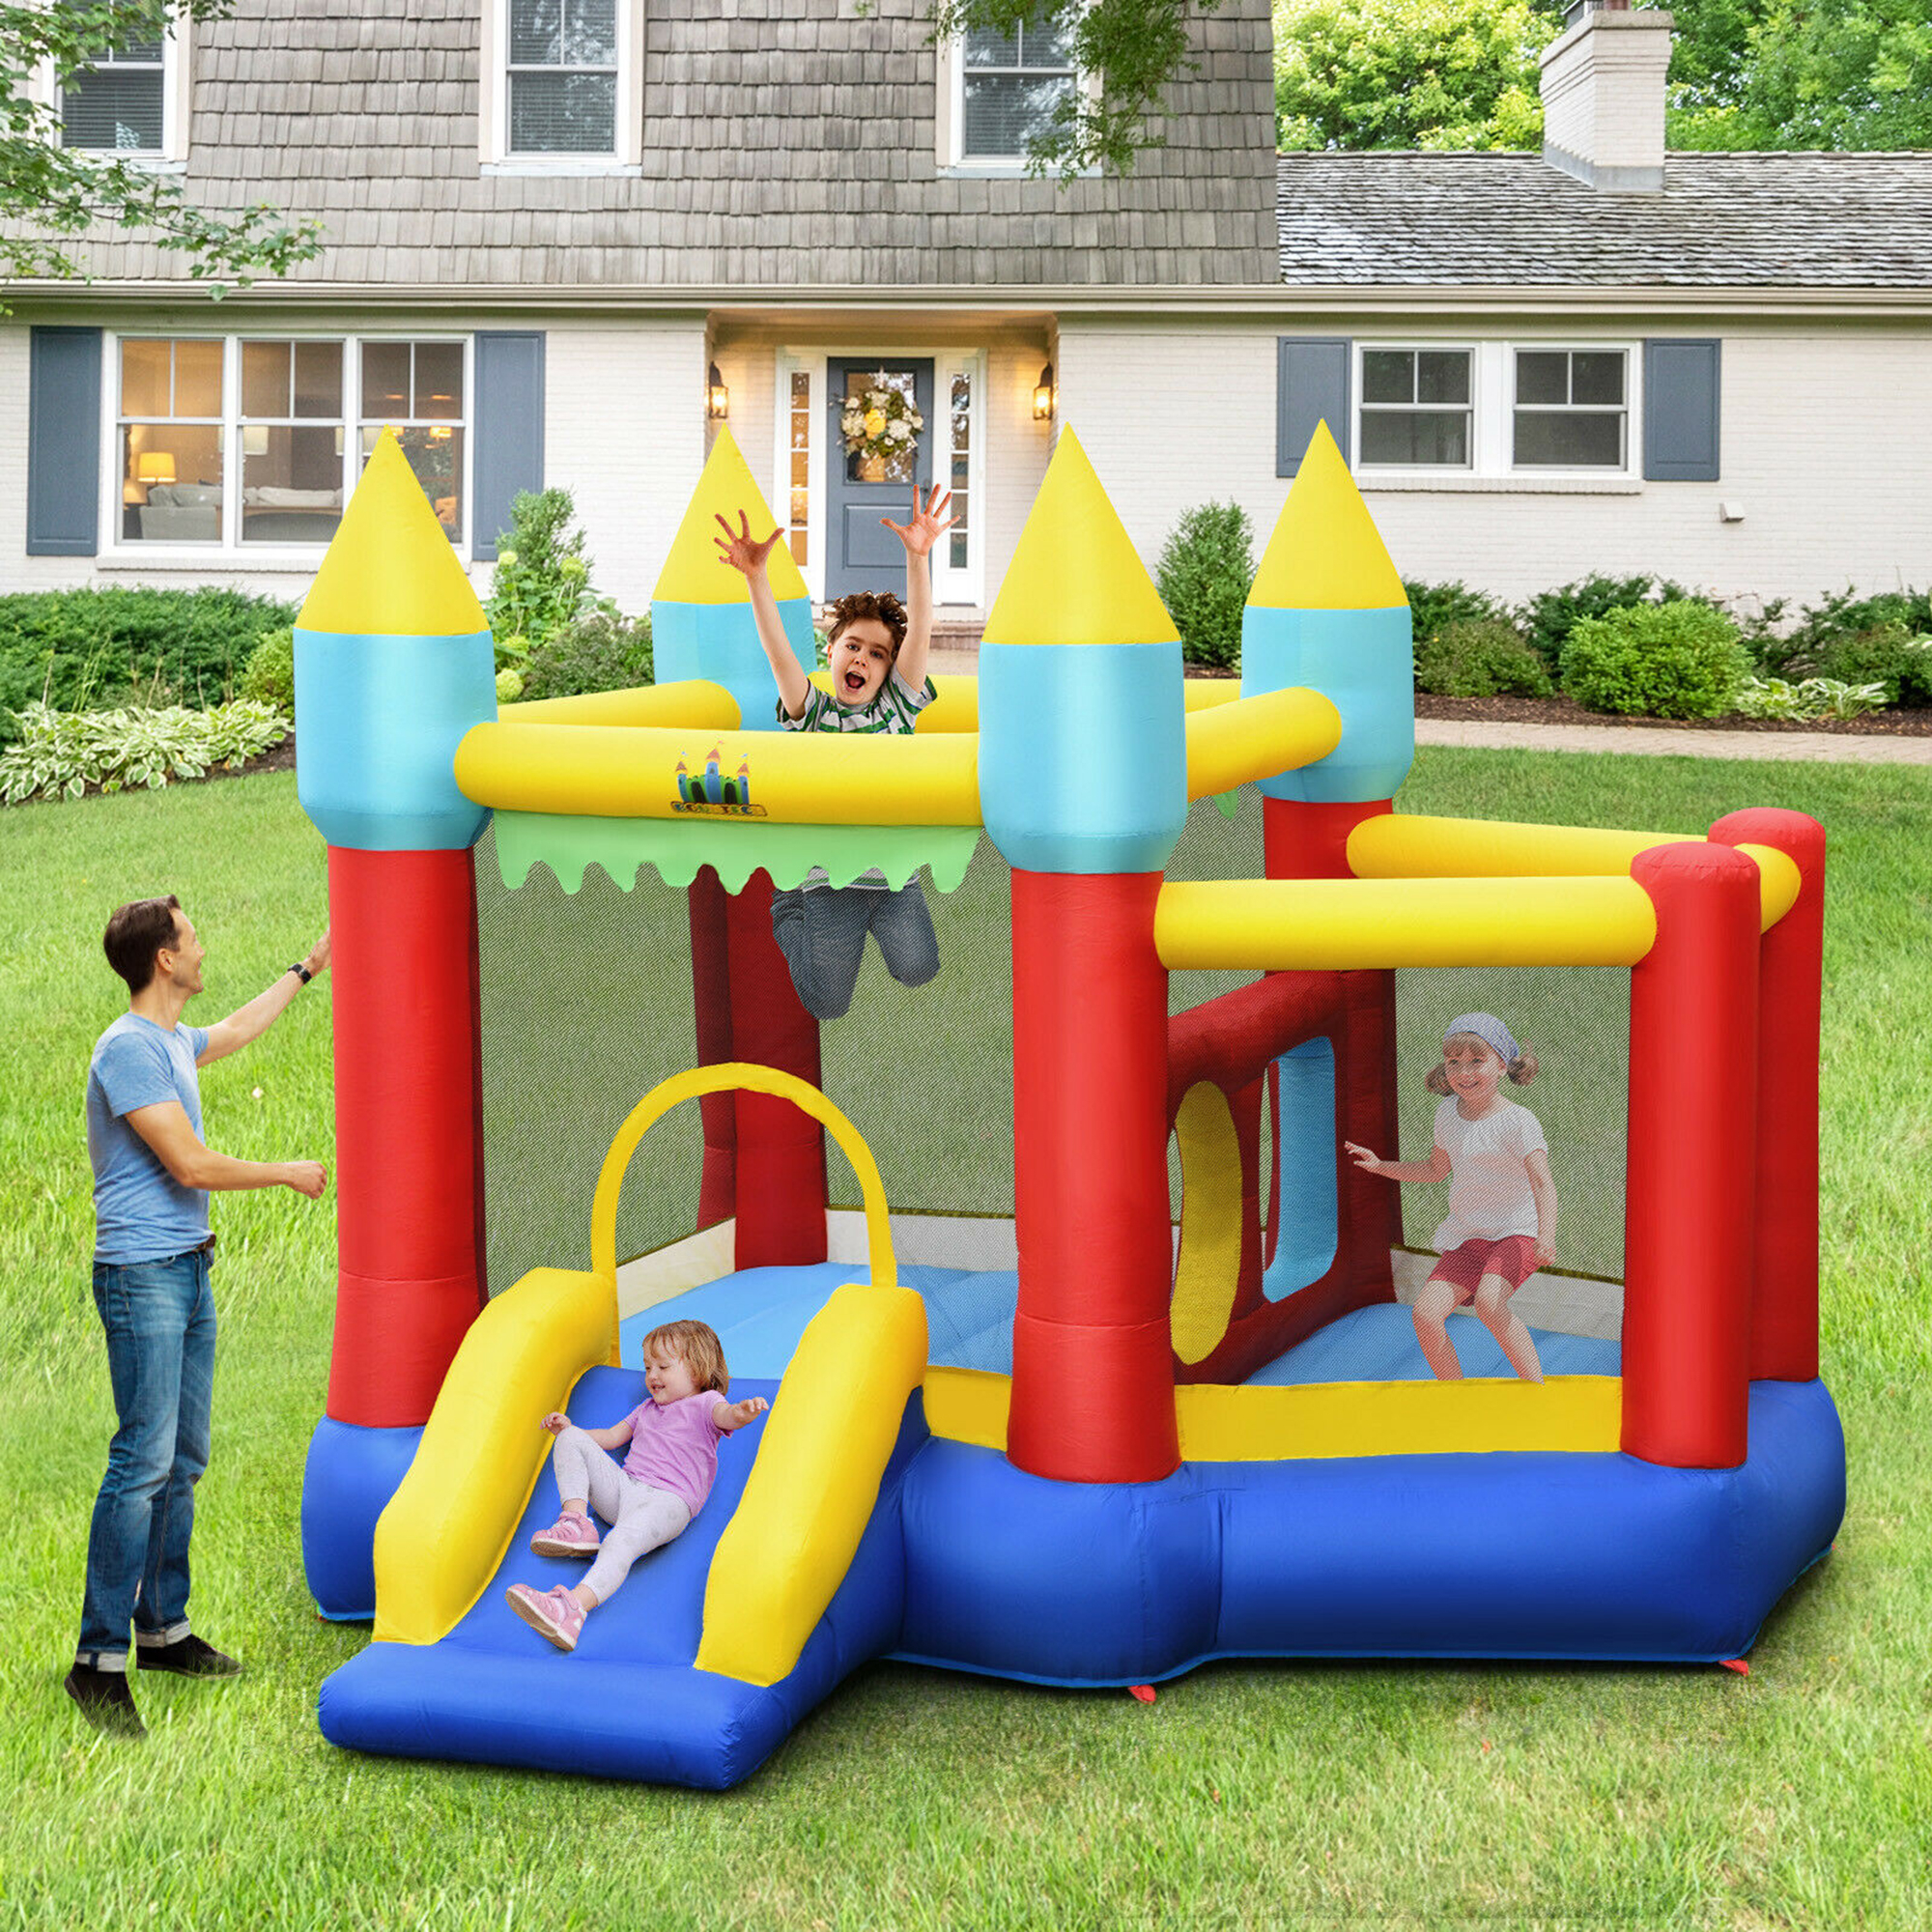 Inflatable Bounce House Slide Jumping Castle Ball Pit Tunnels Without Blower